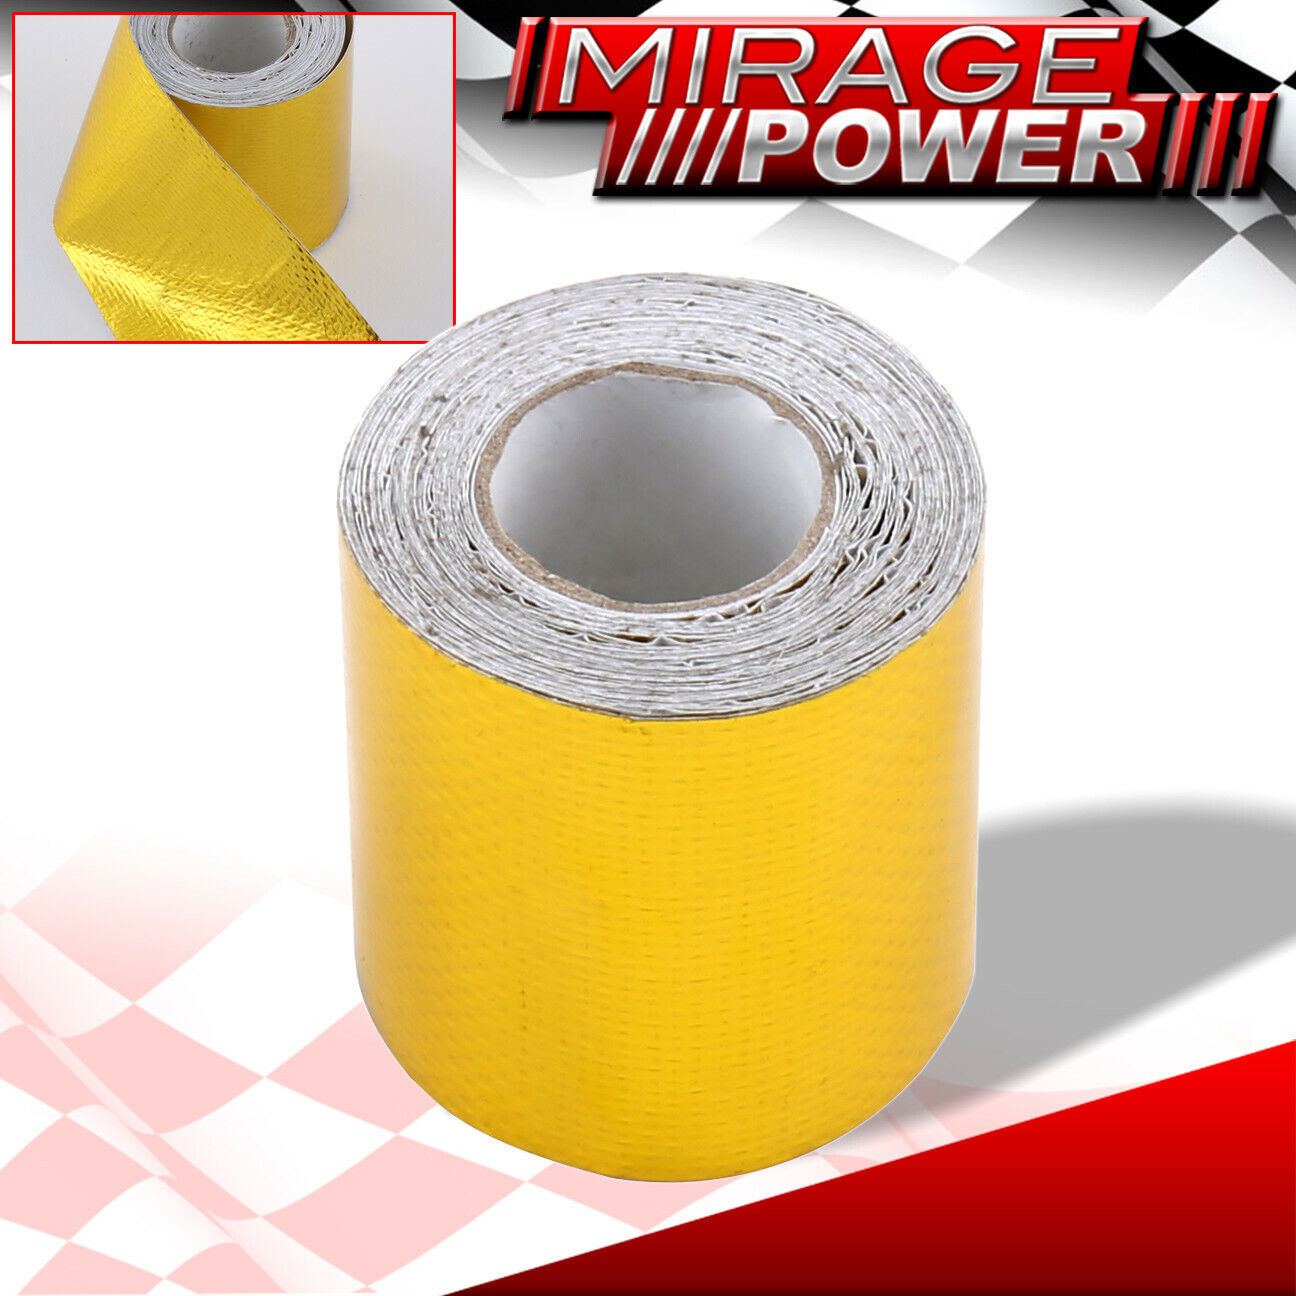 2 Inch X 15 Feet Gold Adhesive Heat Wrap Protection Barrier Protection Tape Roll